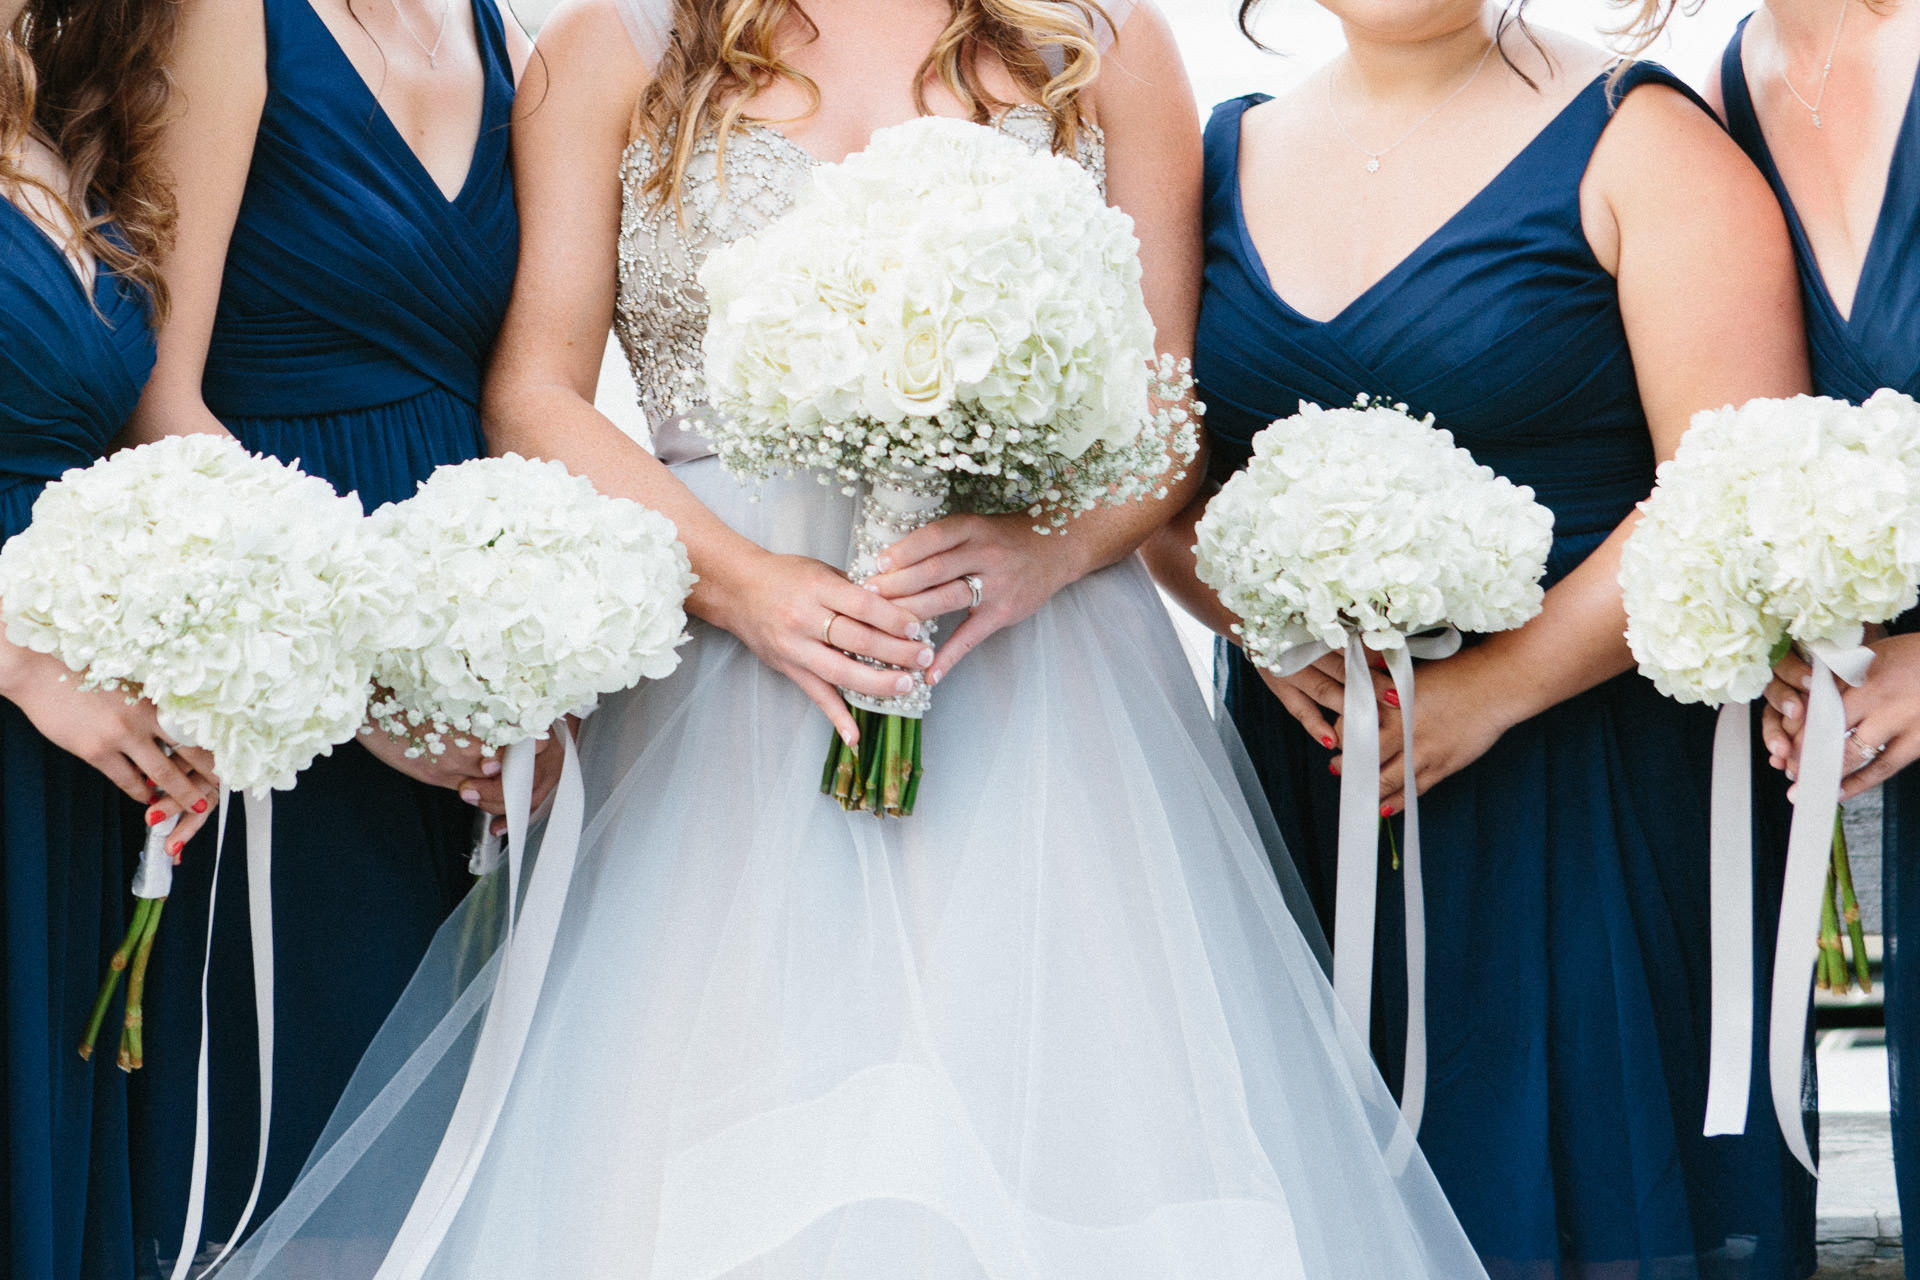 Bride and bridesmaids holding their floral bouquets